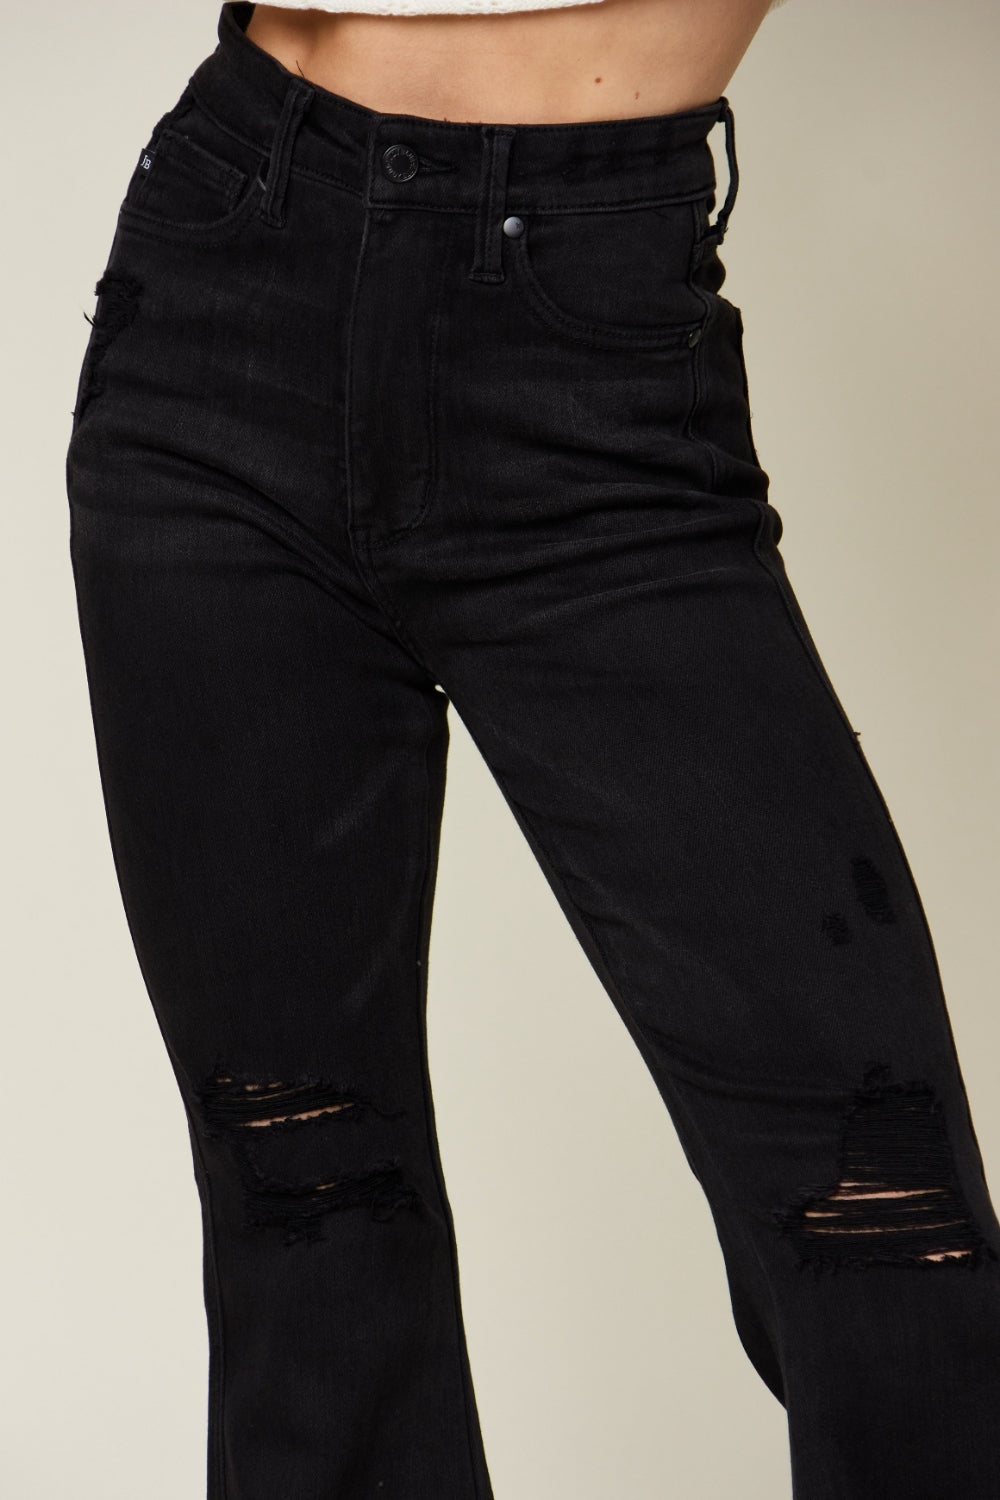 Judy Blue High Waist Distressed Flare Jeans - Mulberry Skies